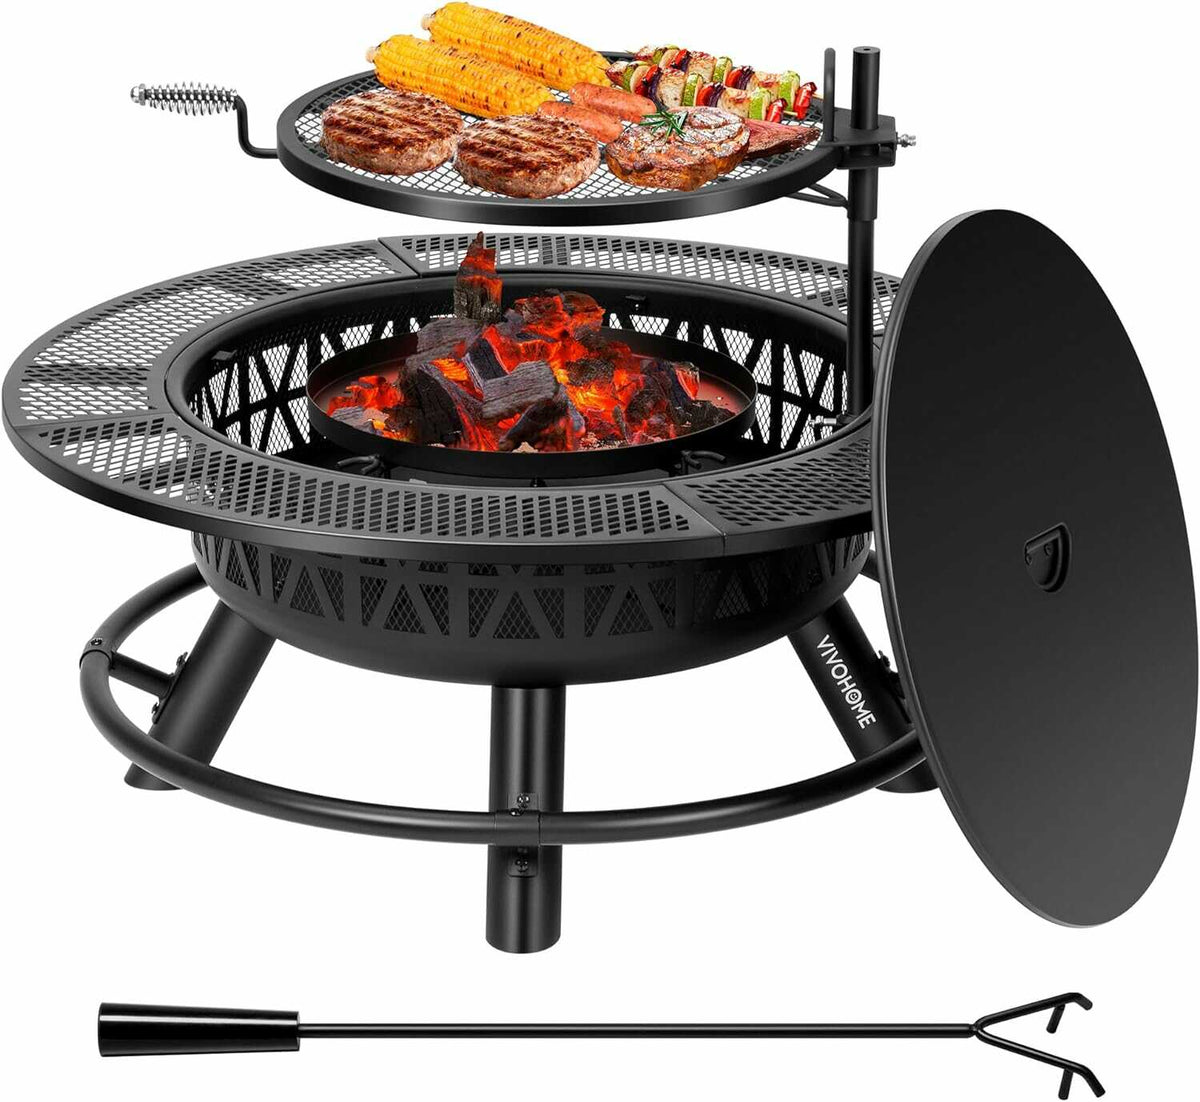 VIVOHOME 35 Inch Fire Pit with Cooking Grill Grate and Charcoal Pan